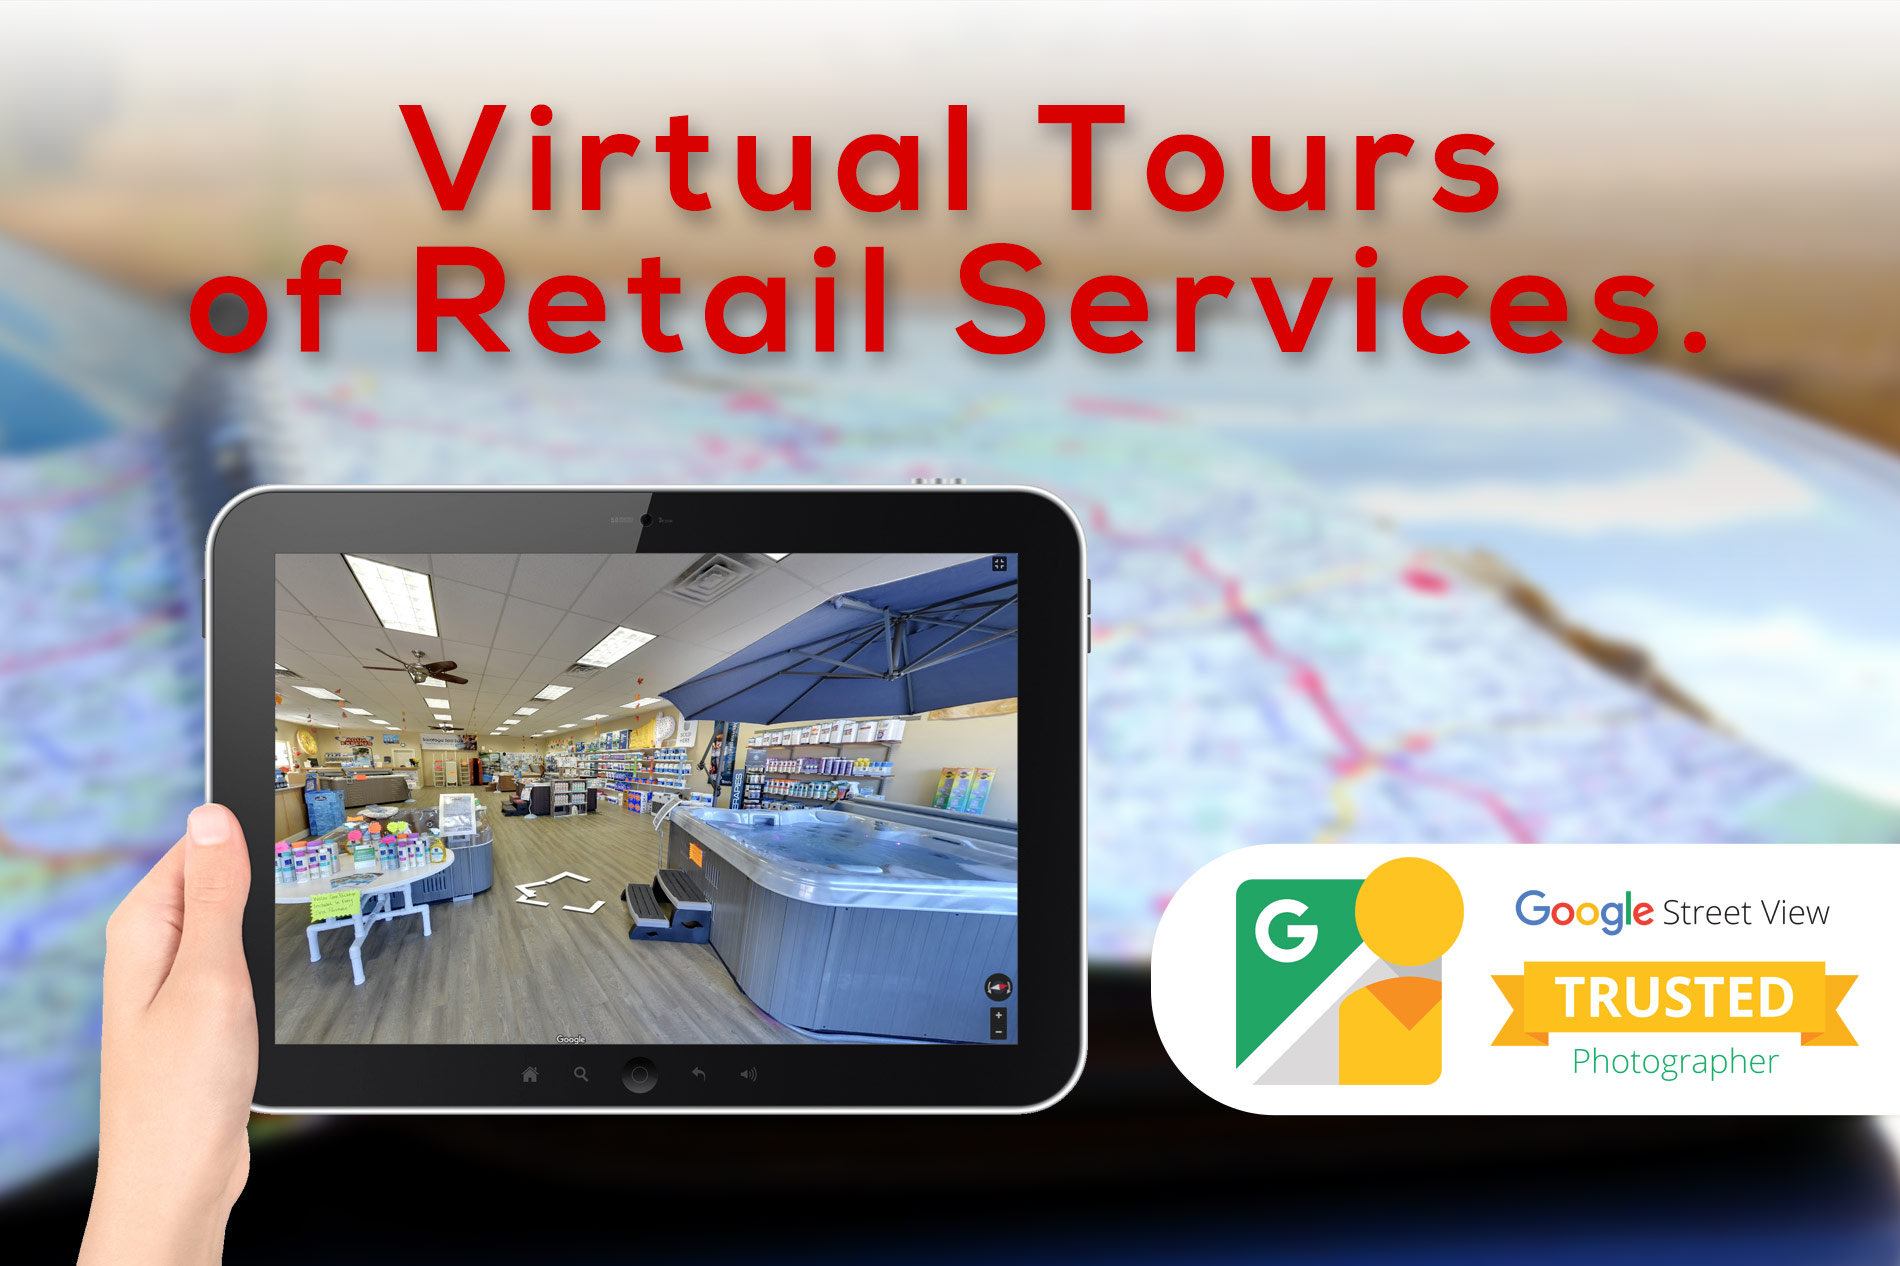 Virtual-Tours-of-Retail-Services Services - Make it Active, LLC - Results from #28